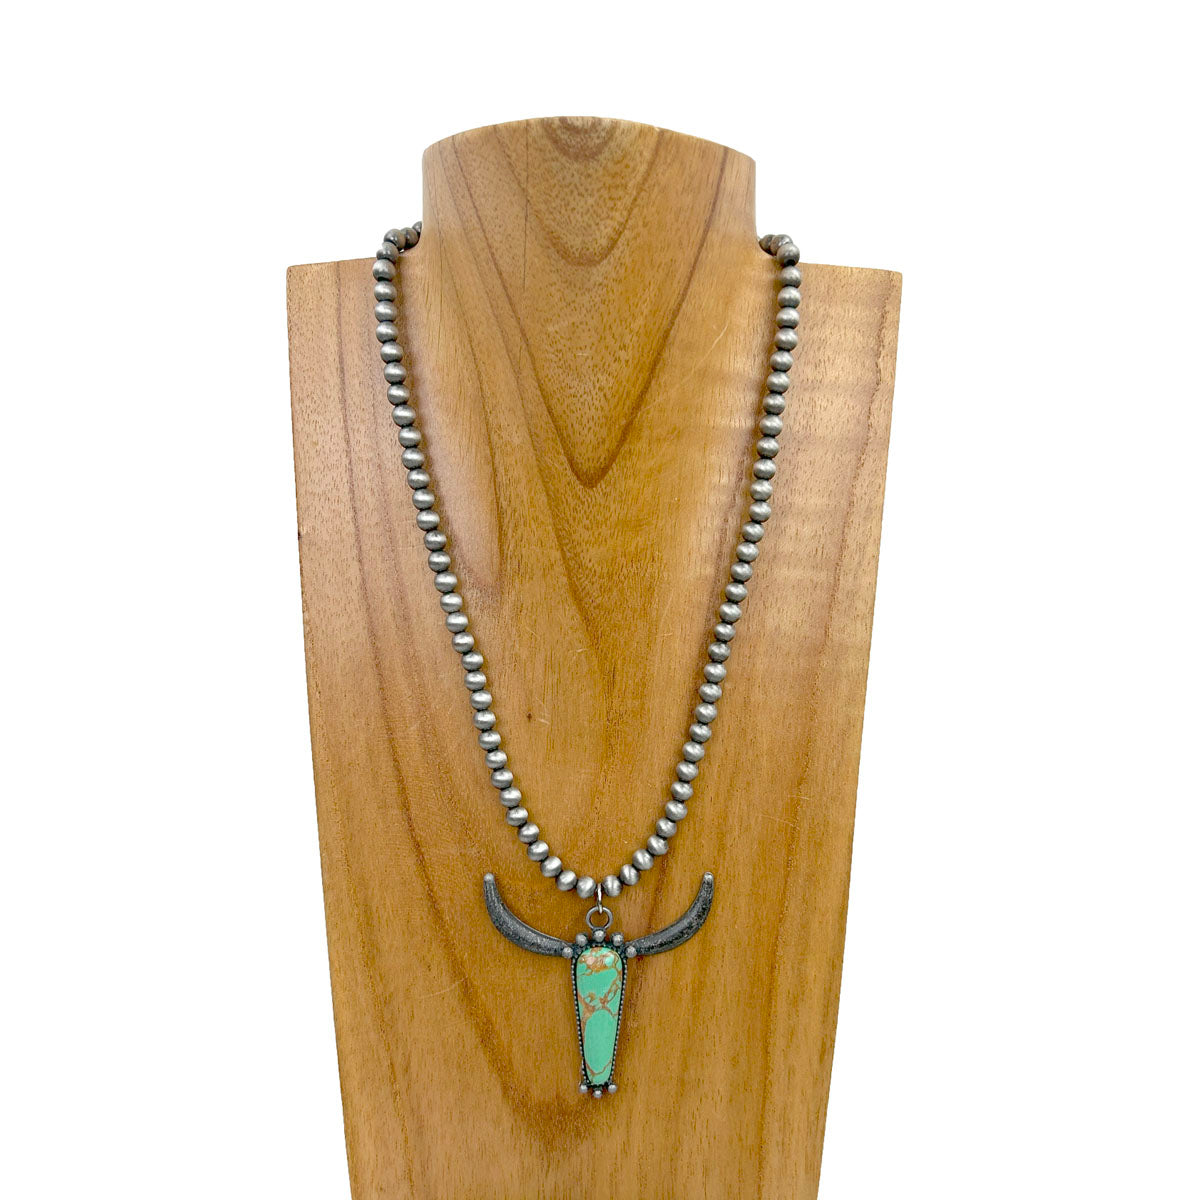 NKY230910-01SL-BLUE           18 inches silver Navajo pearl beads with blue turquoise stone  long horn pendent Necklace